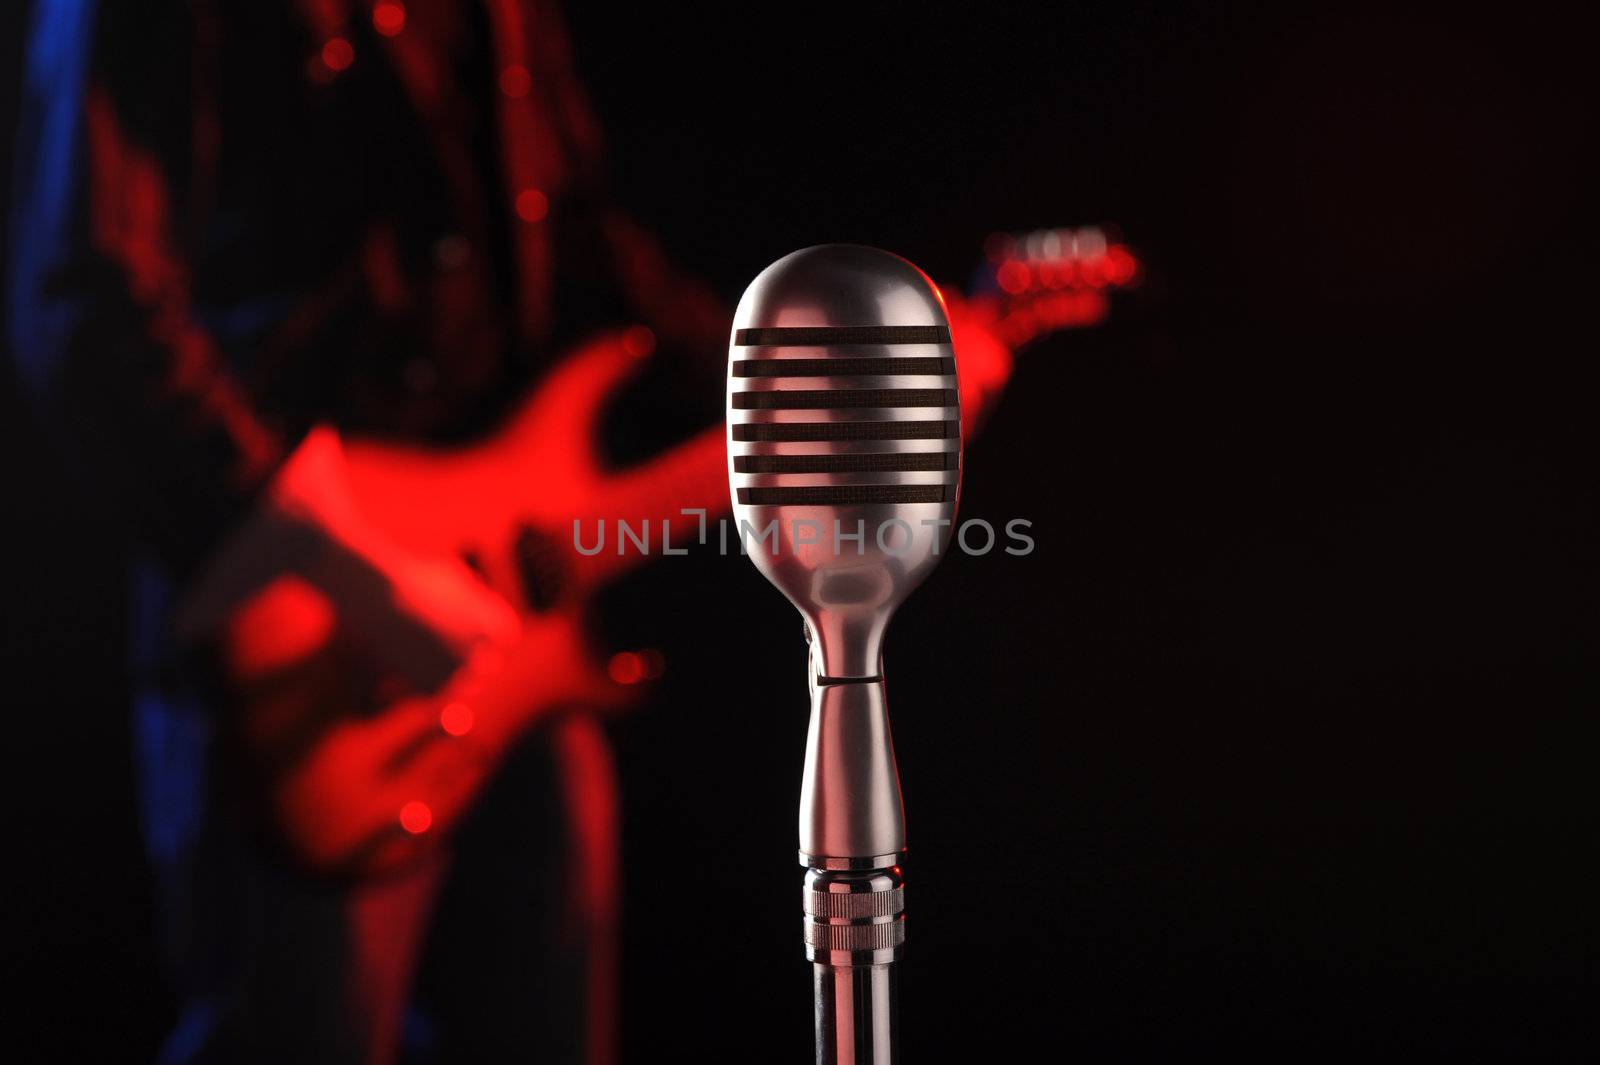 old microphone in the foreground with a guitarist in the background